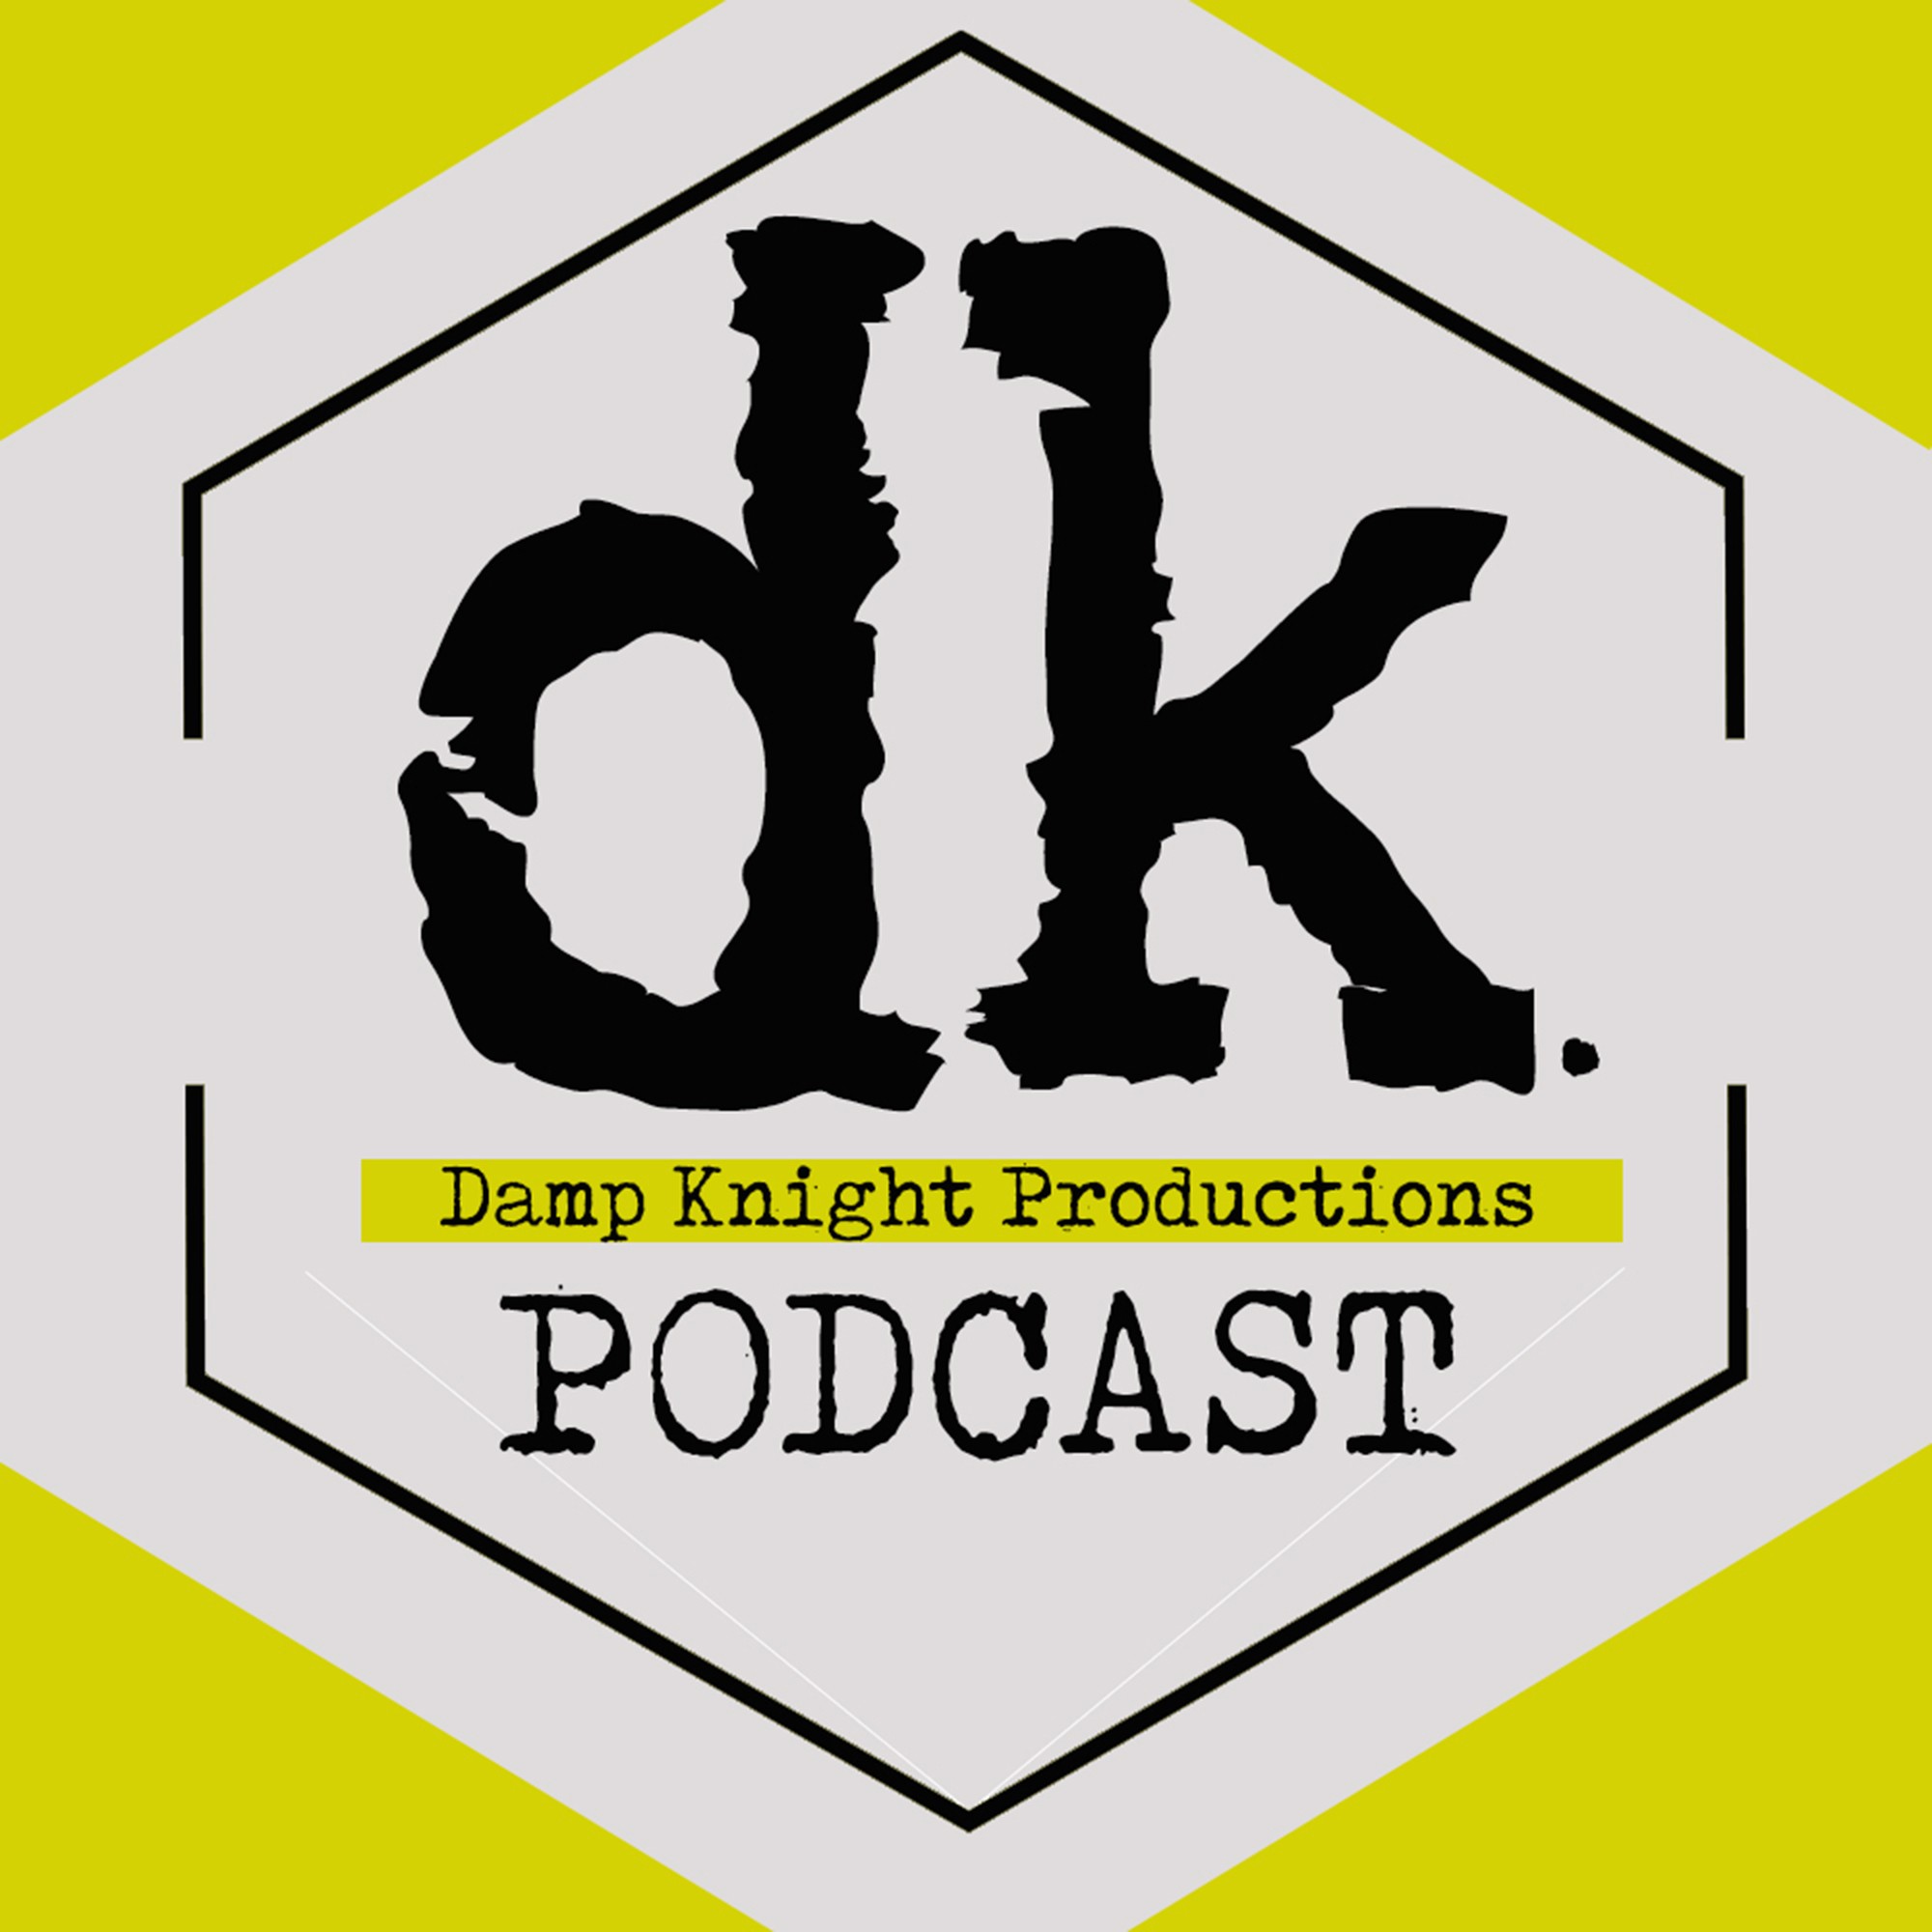 DK Podcast Ep 4 - Damp Table/The News